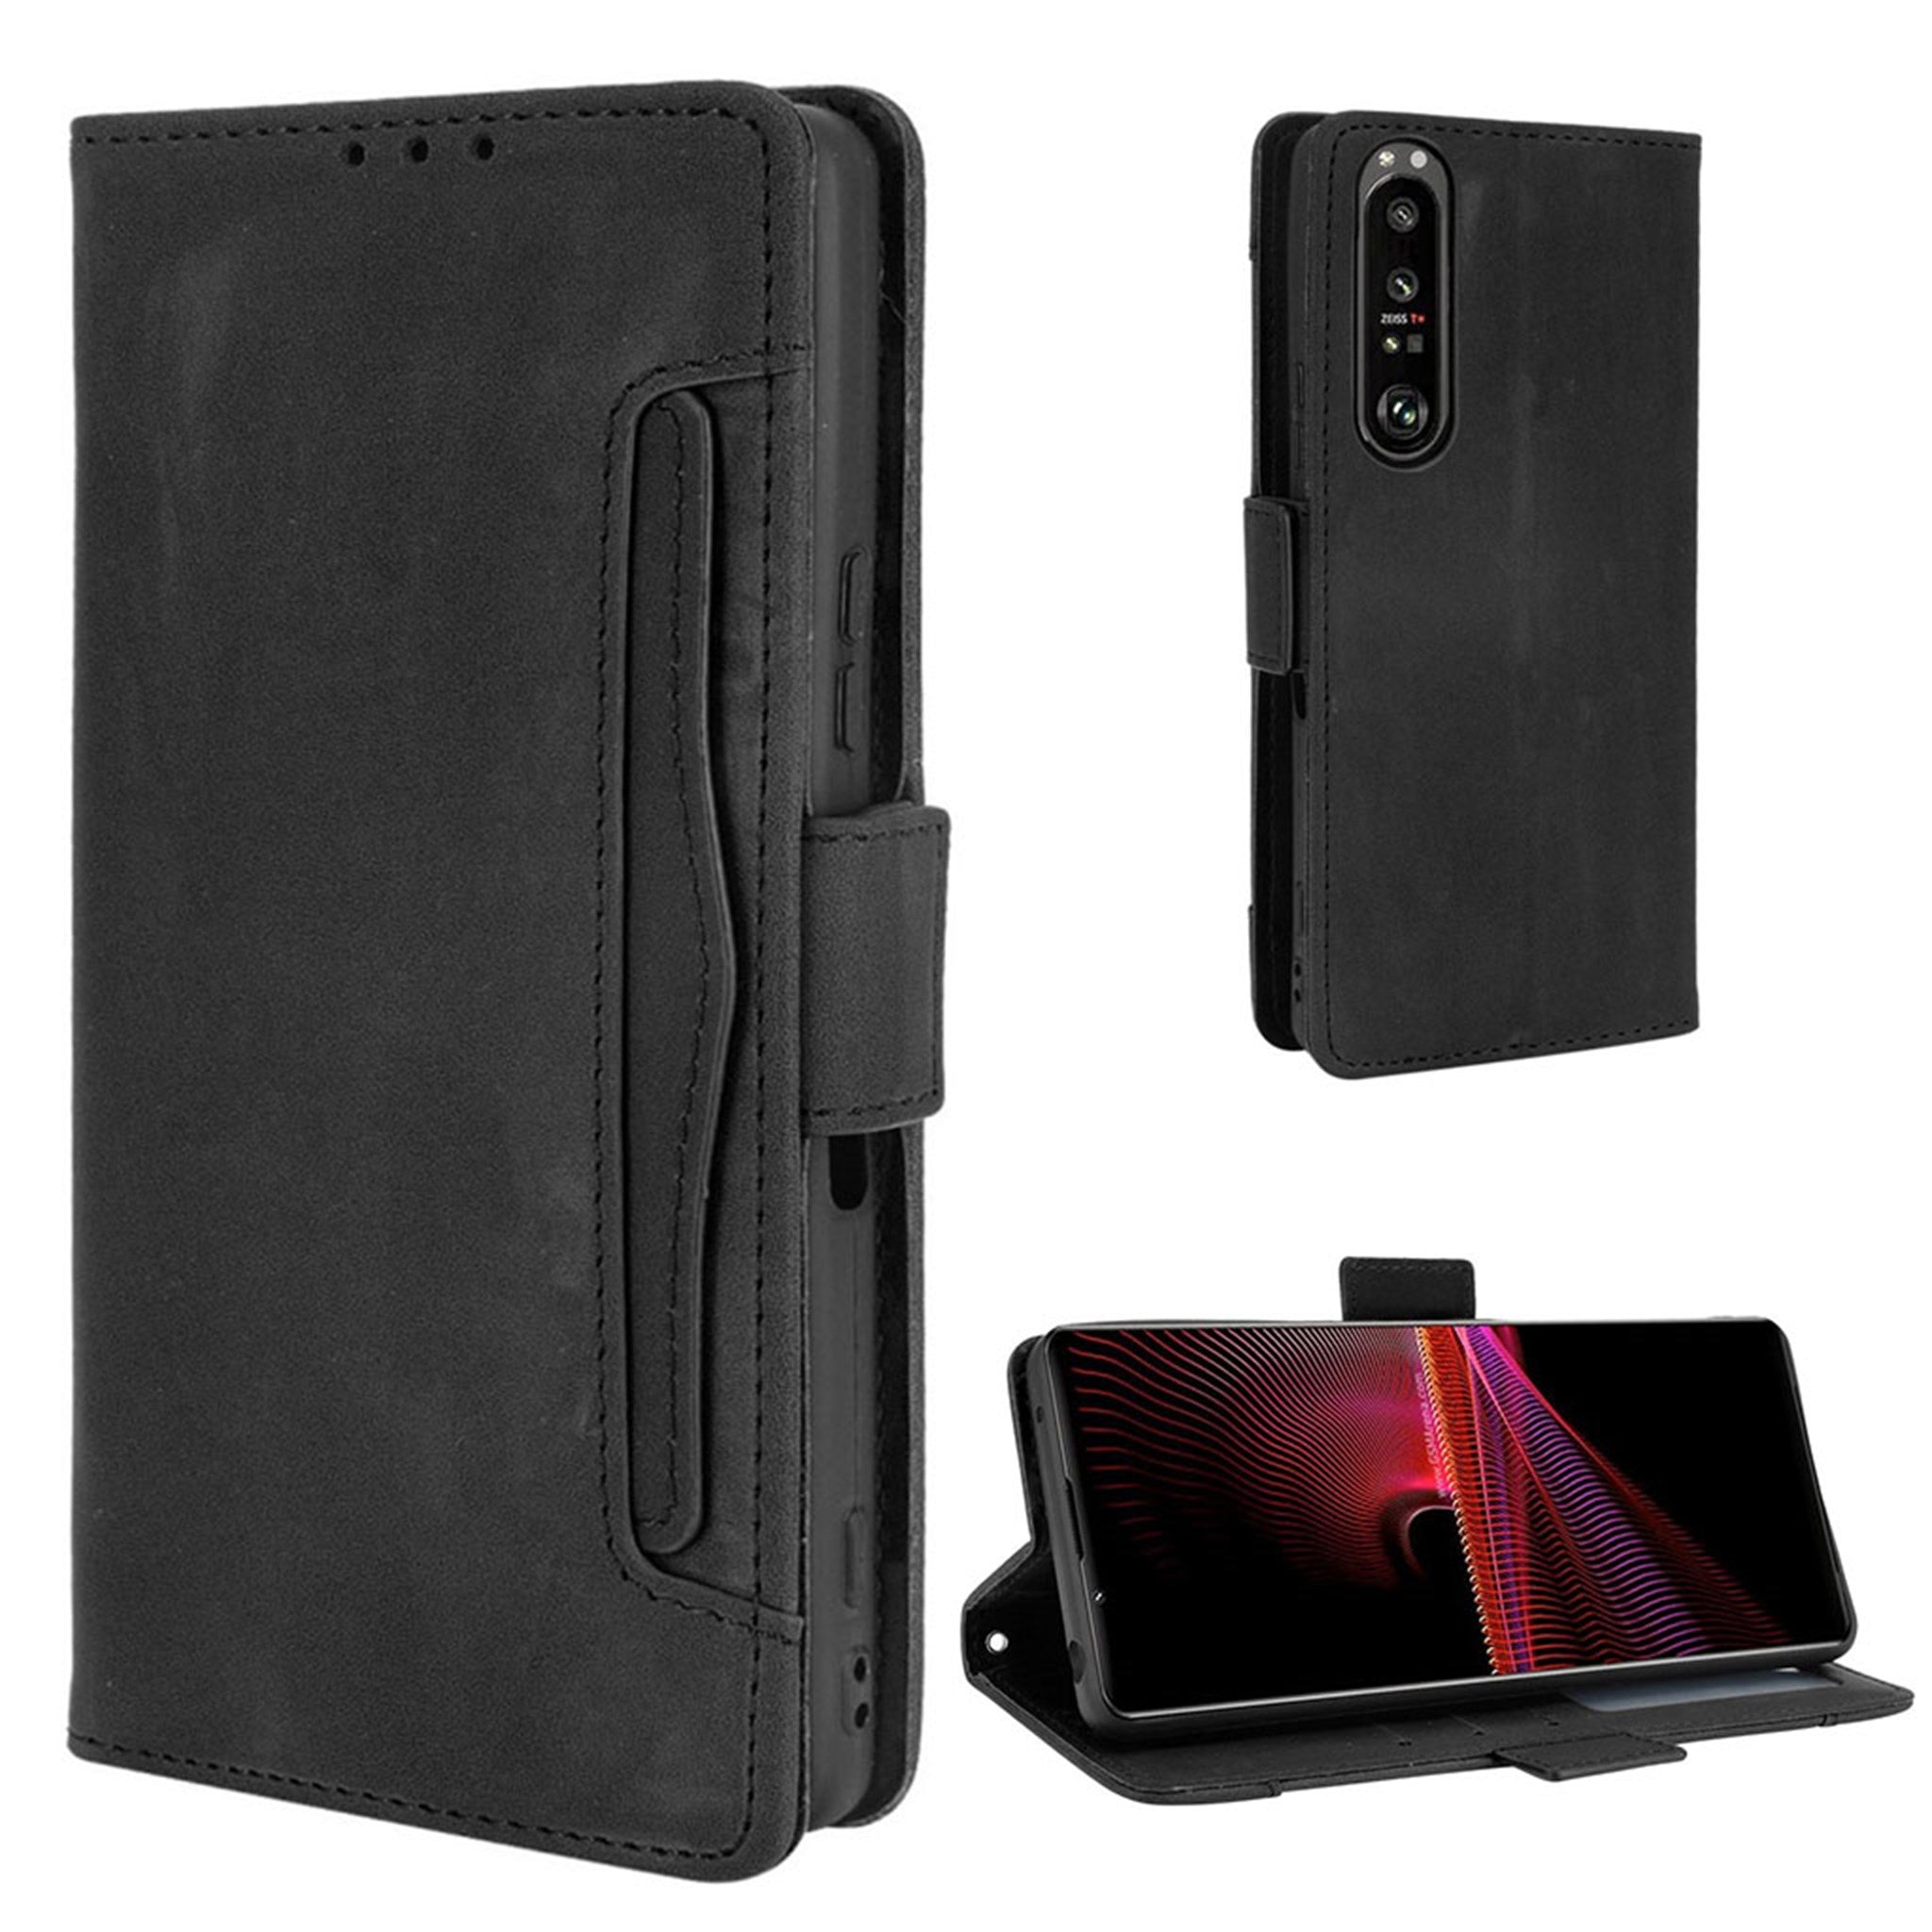 Modern-styled leather wallet case for Sony Xperia 1 III - Black